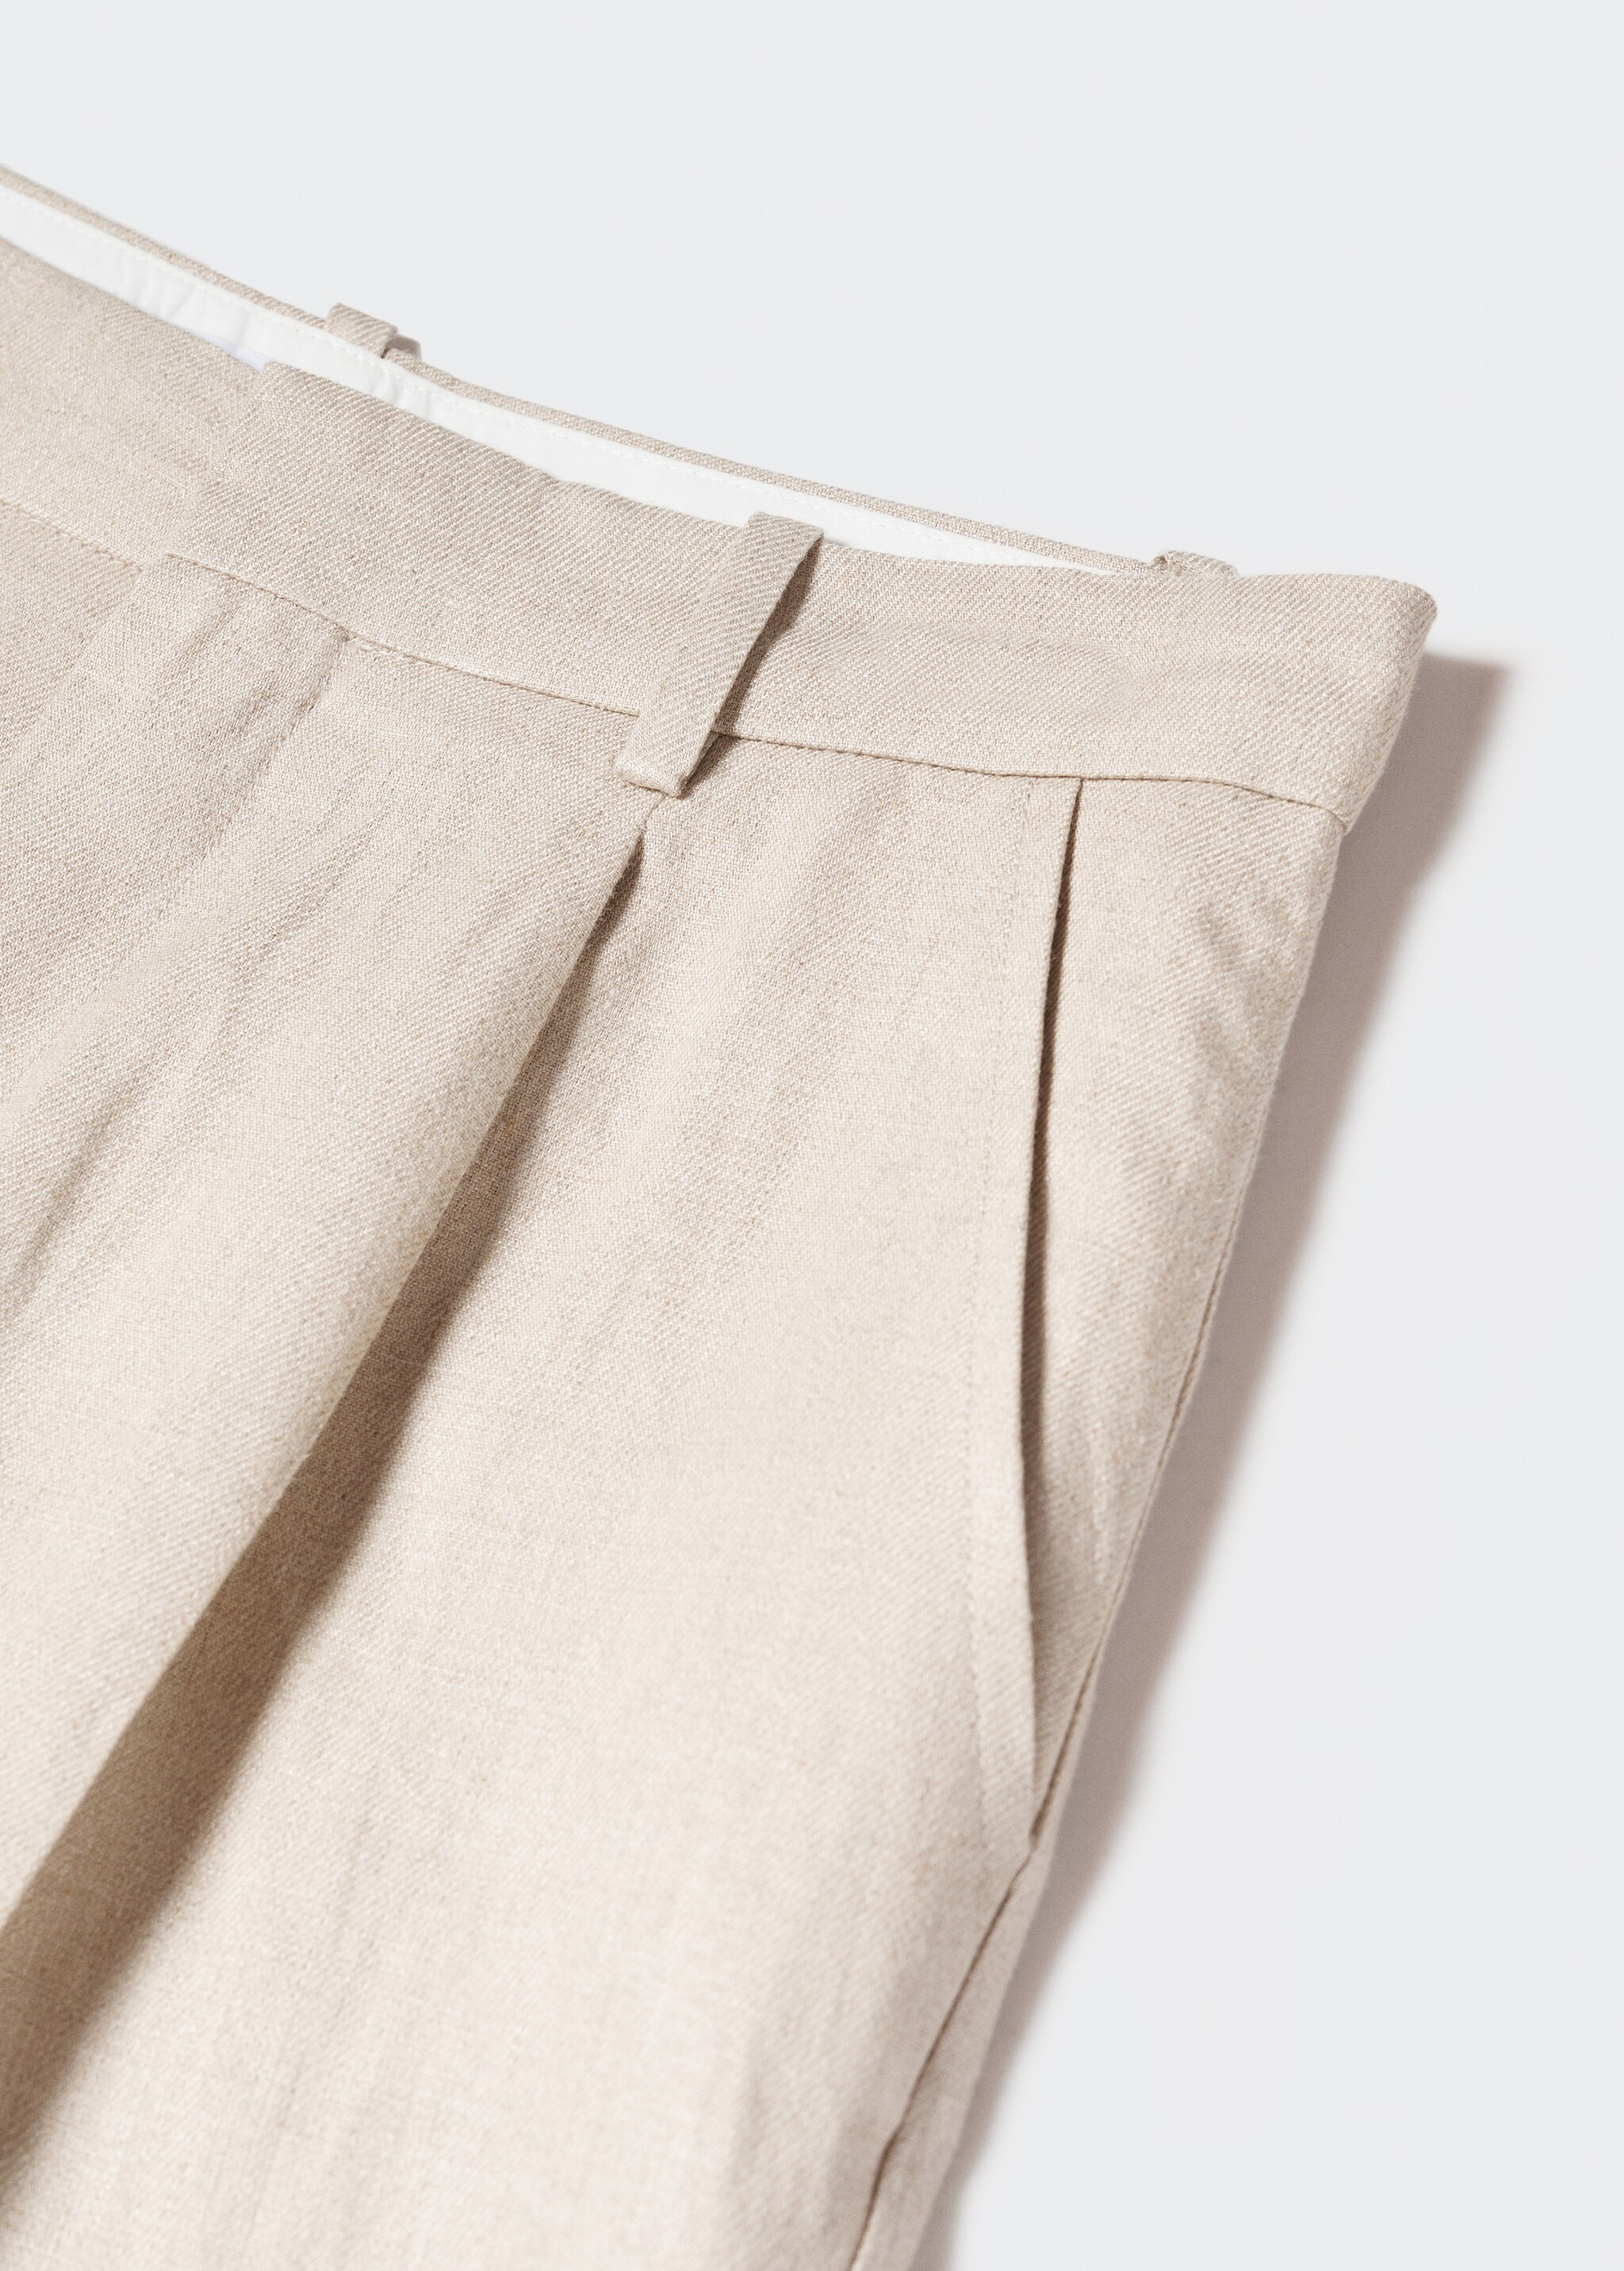 Linen suit trousers - Details of the article 8